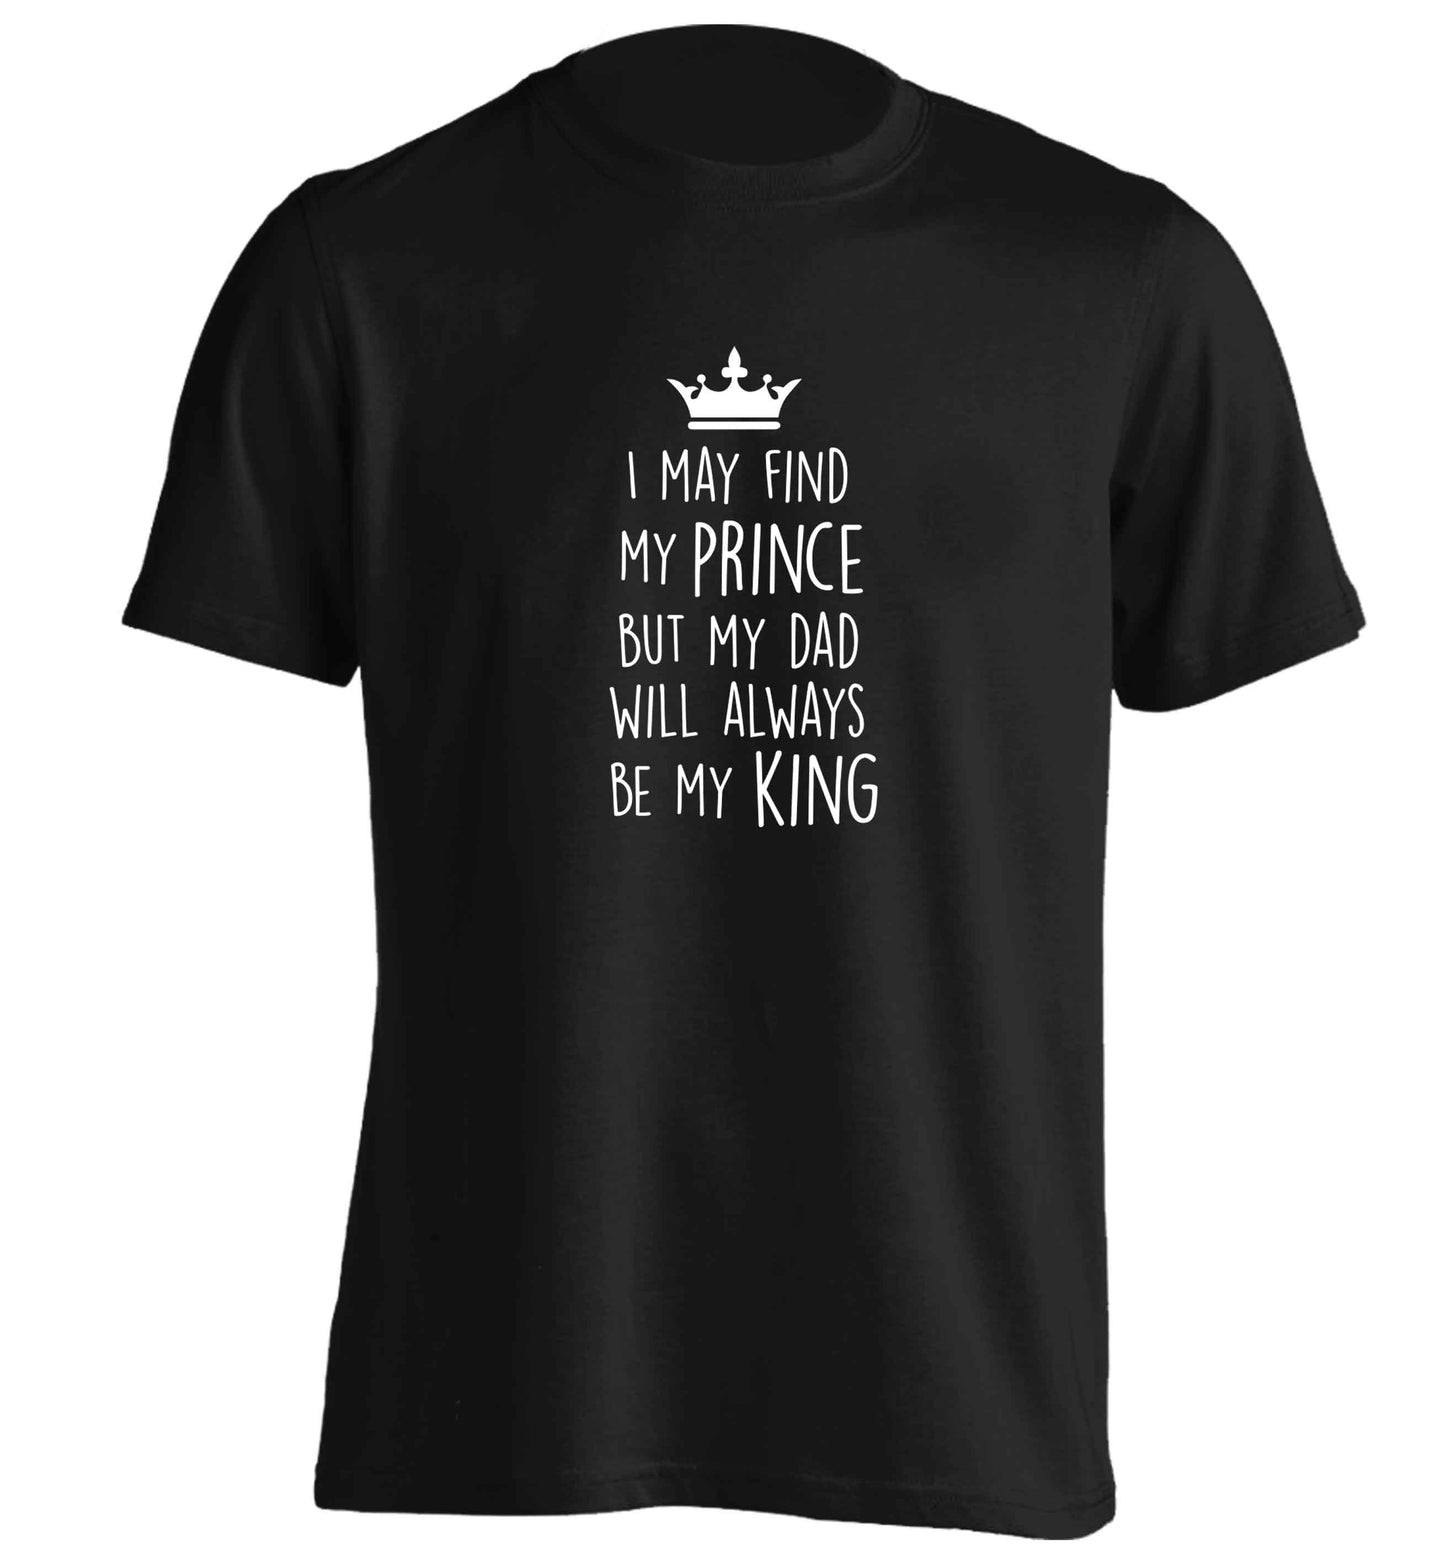 I may find my prince but my dad will always be my king adults unisex black Tshirt 2XL